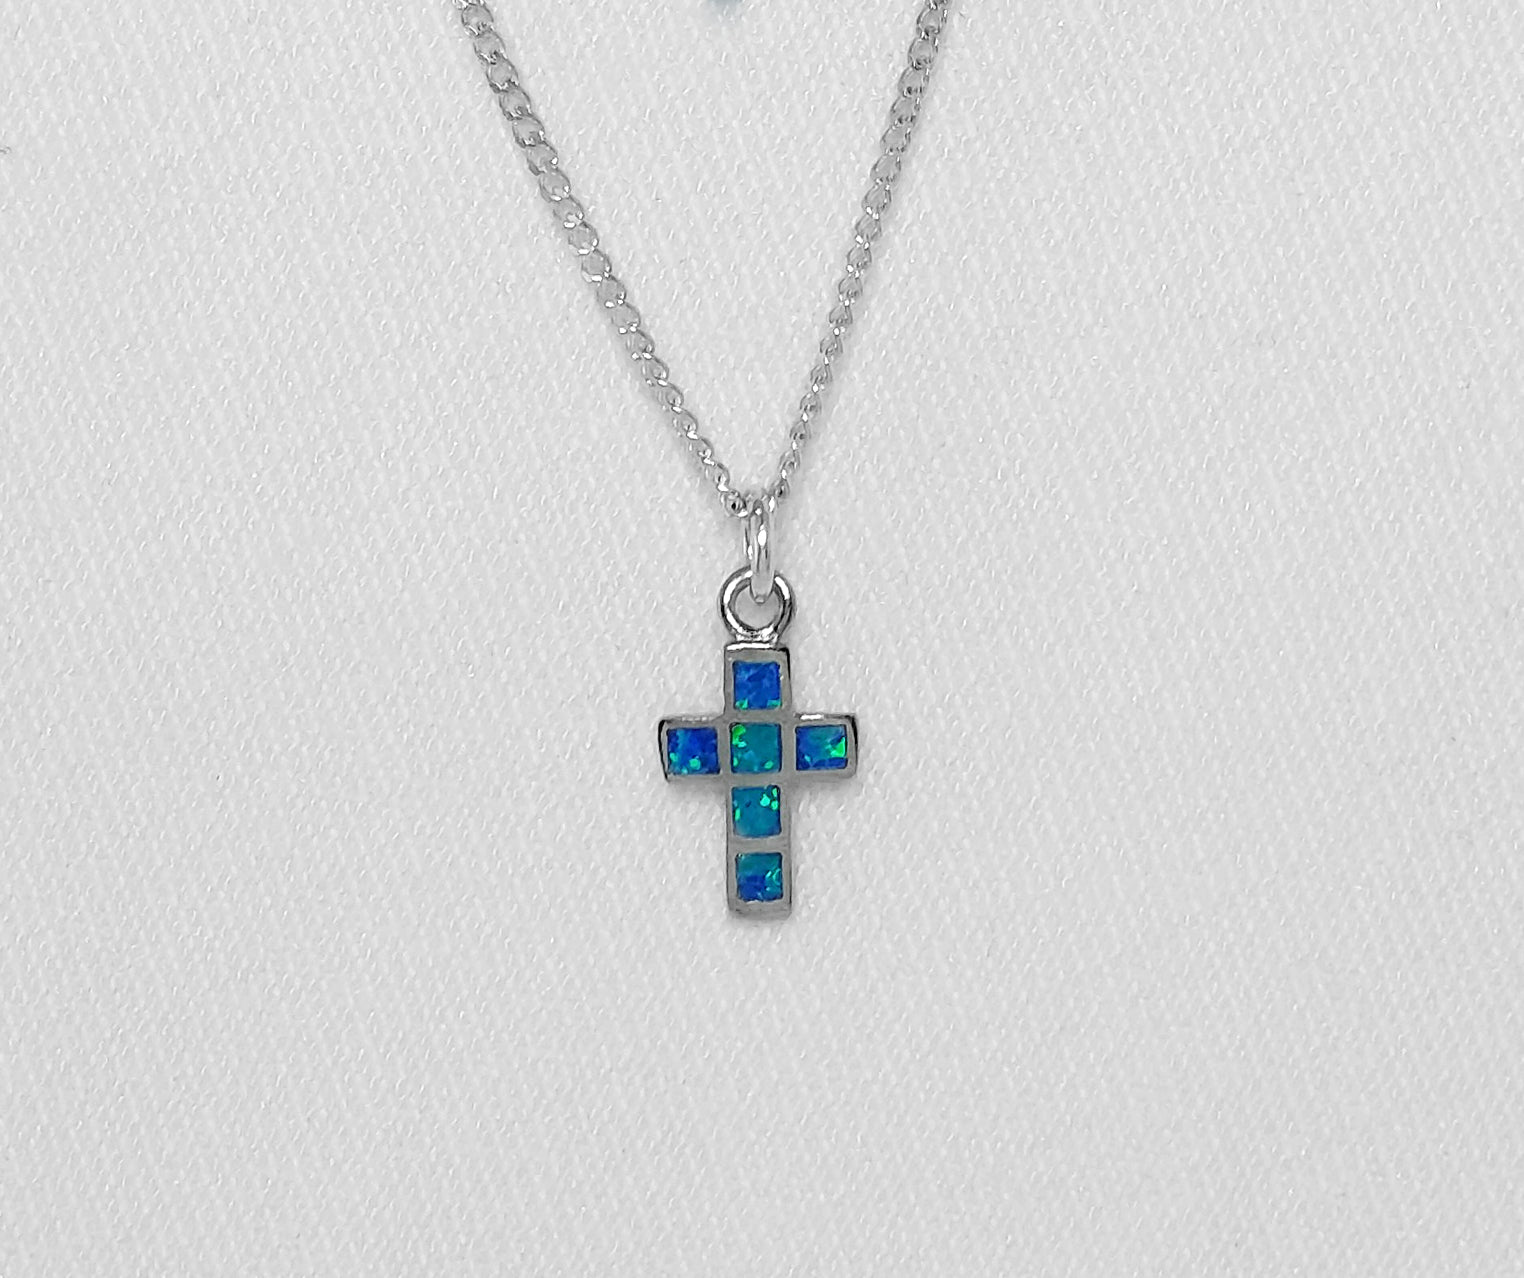 Sterling Silver Cross Pendant with Crushed Opal Inlay